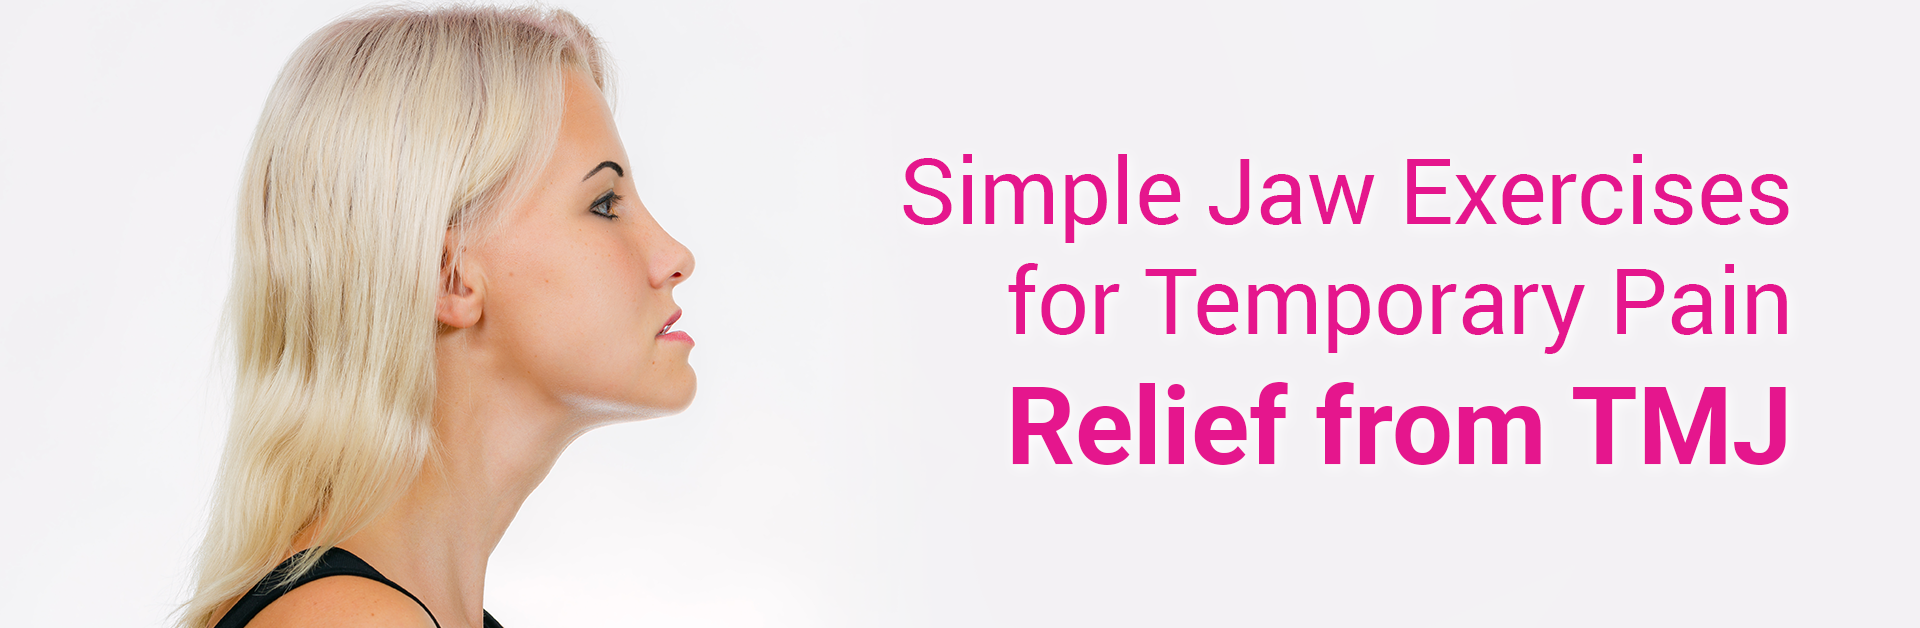 SIMPLE JAW EXERCISES FOR TEMPORARY PAIN RELIEF FROM TMJ